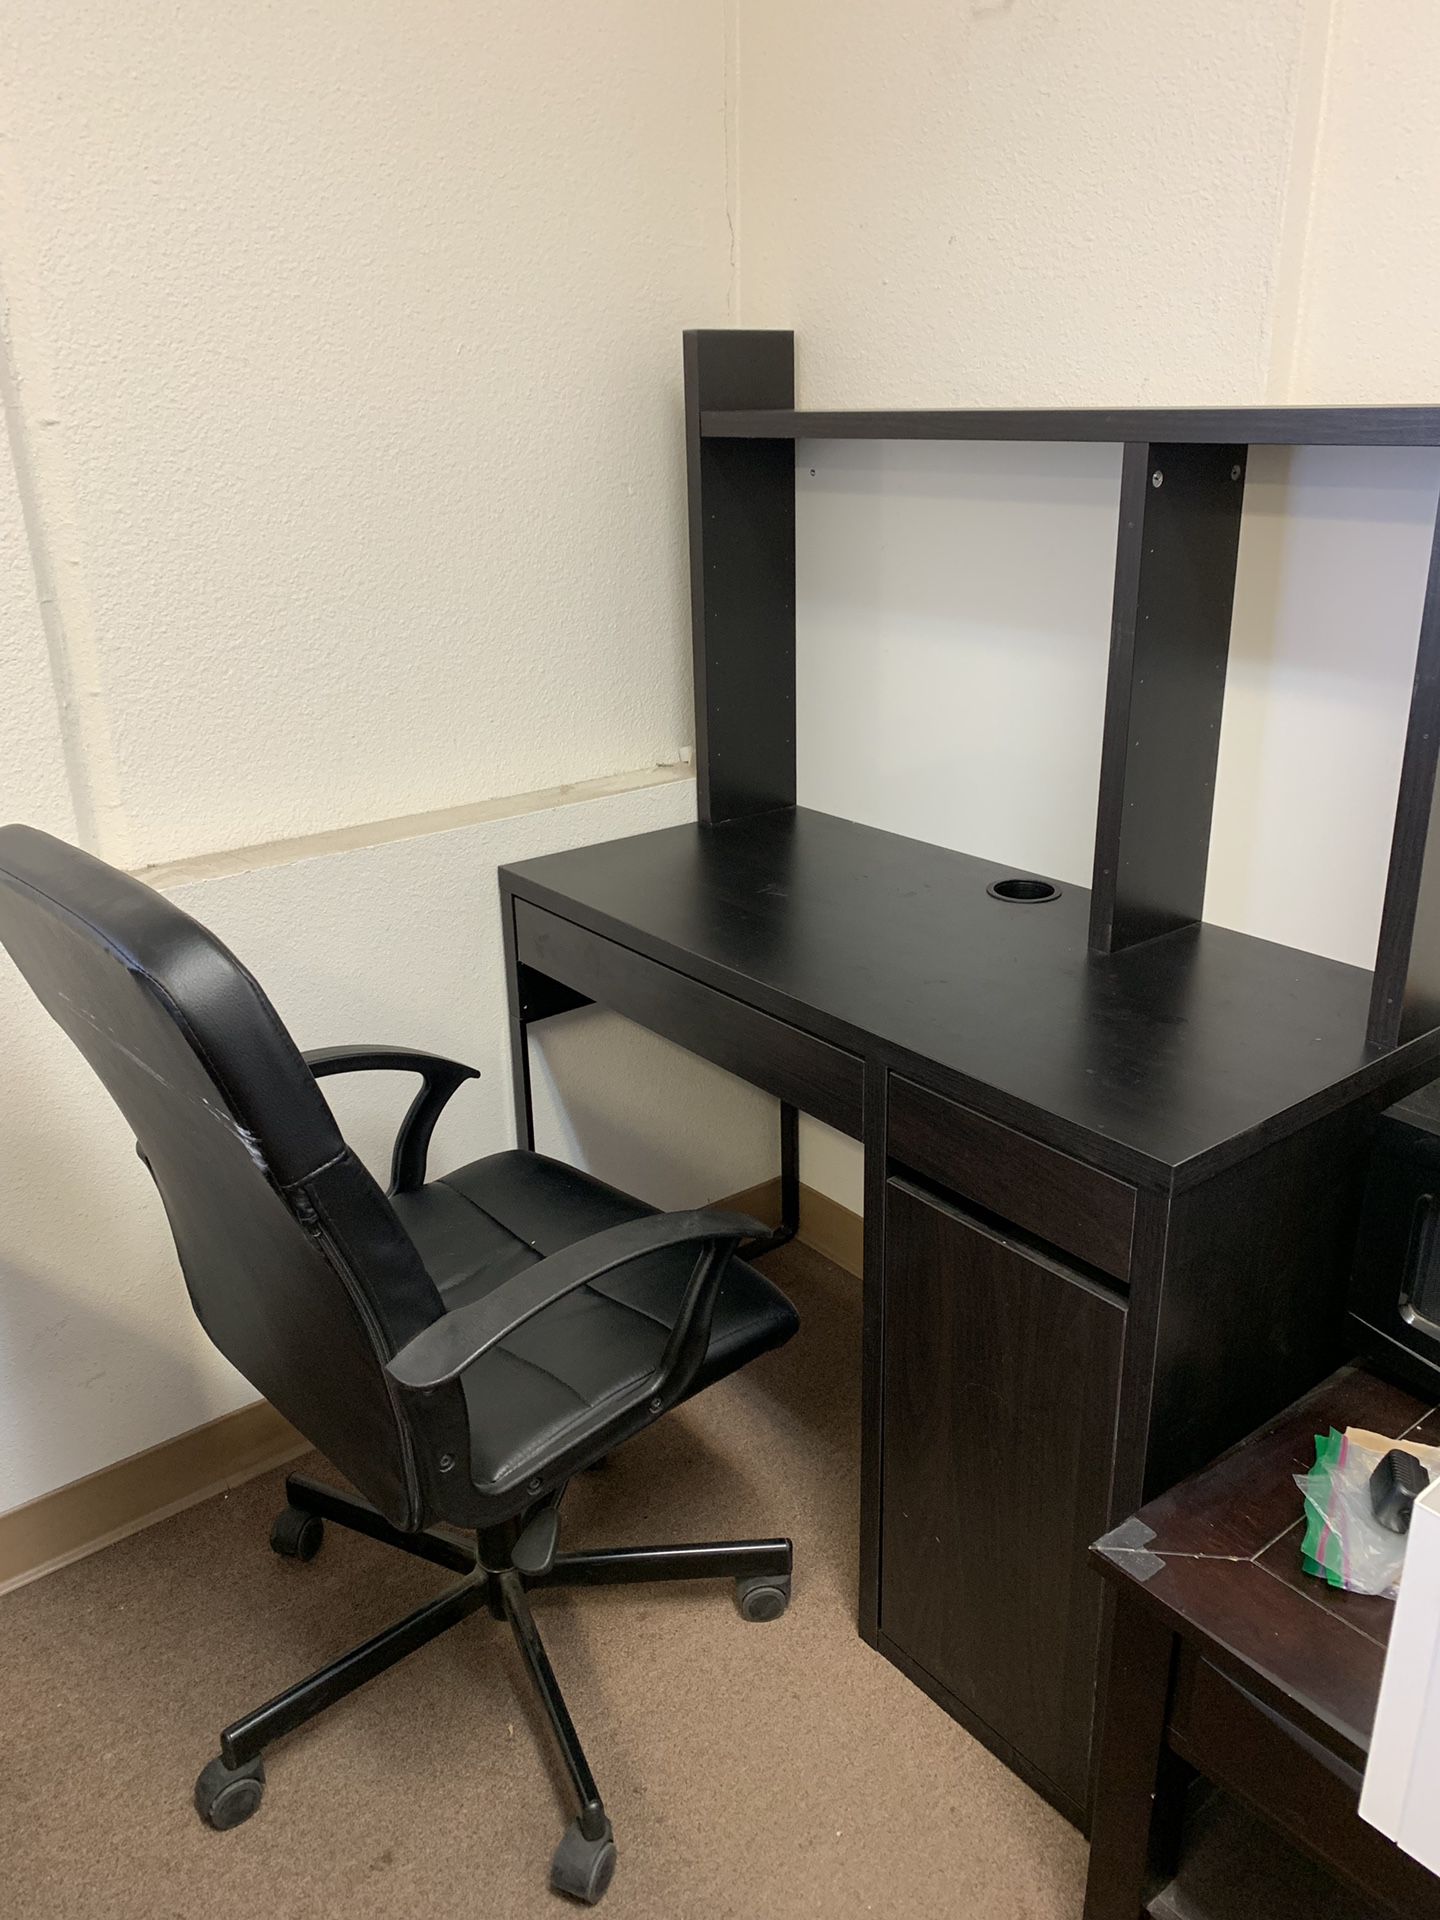 IKEA office desk and chair set